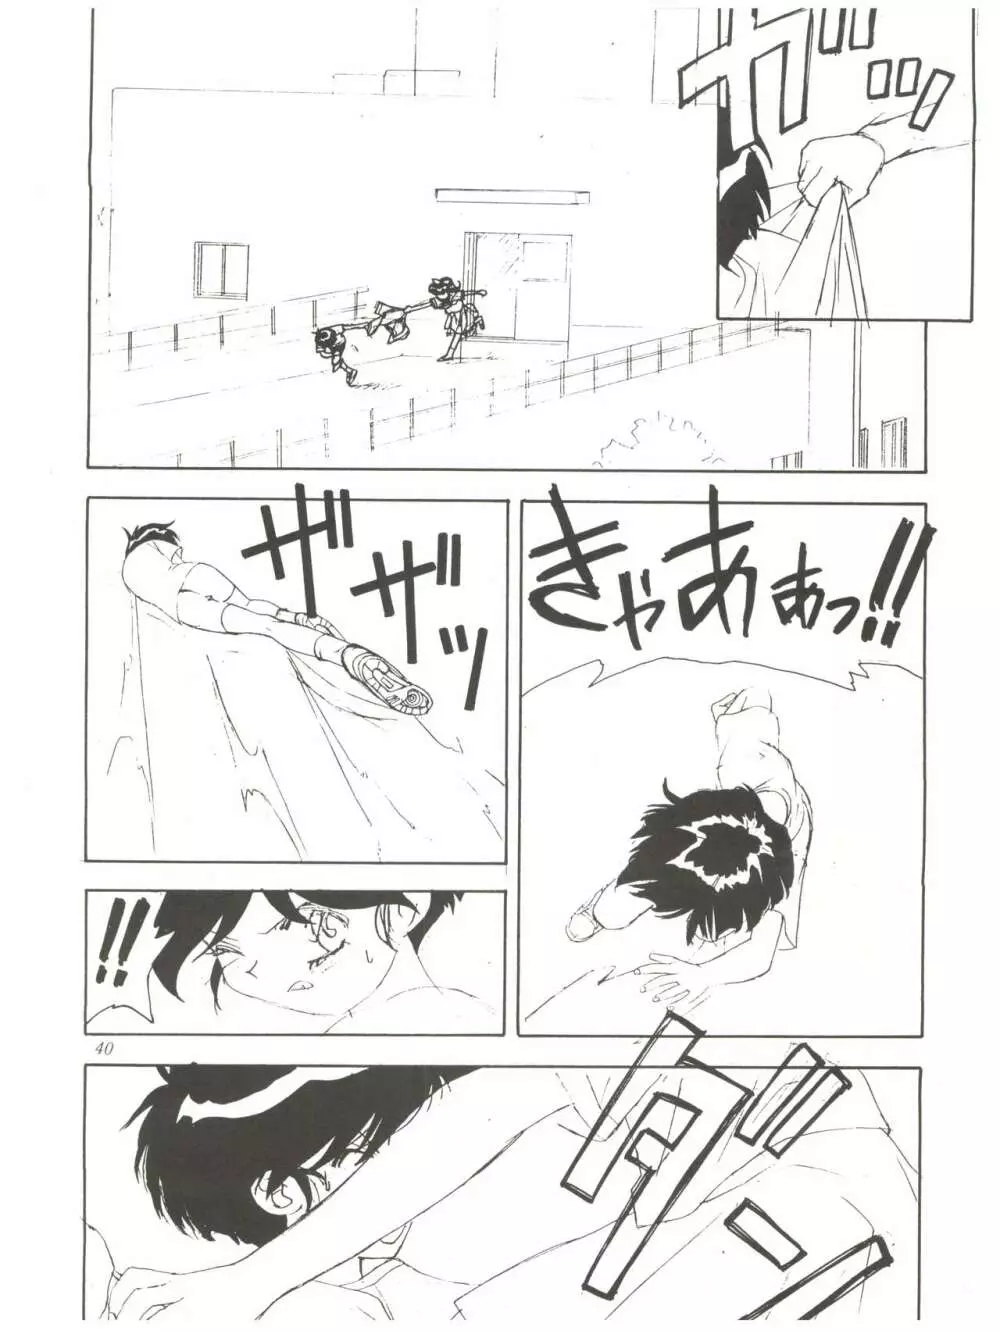 FLY! ISAMI!! Page.44